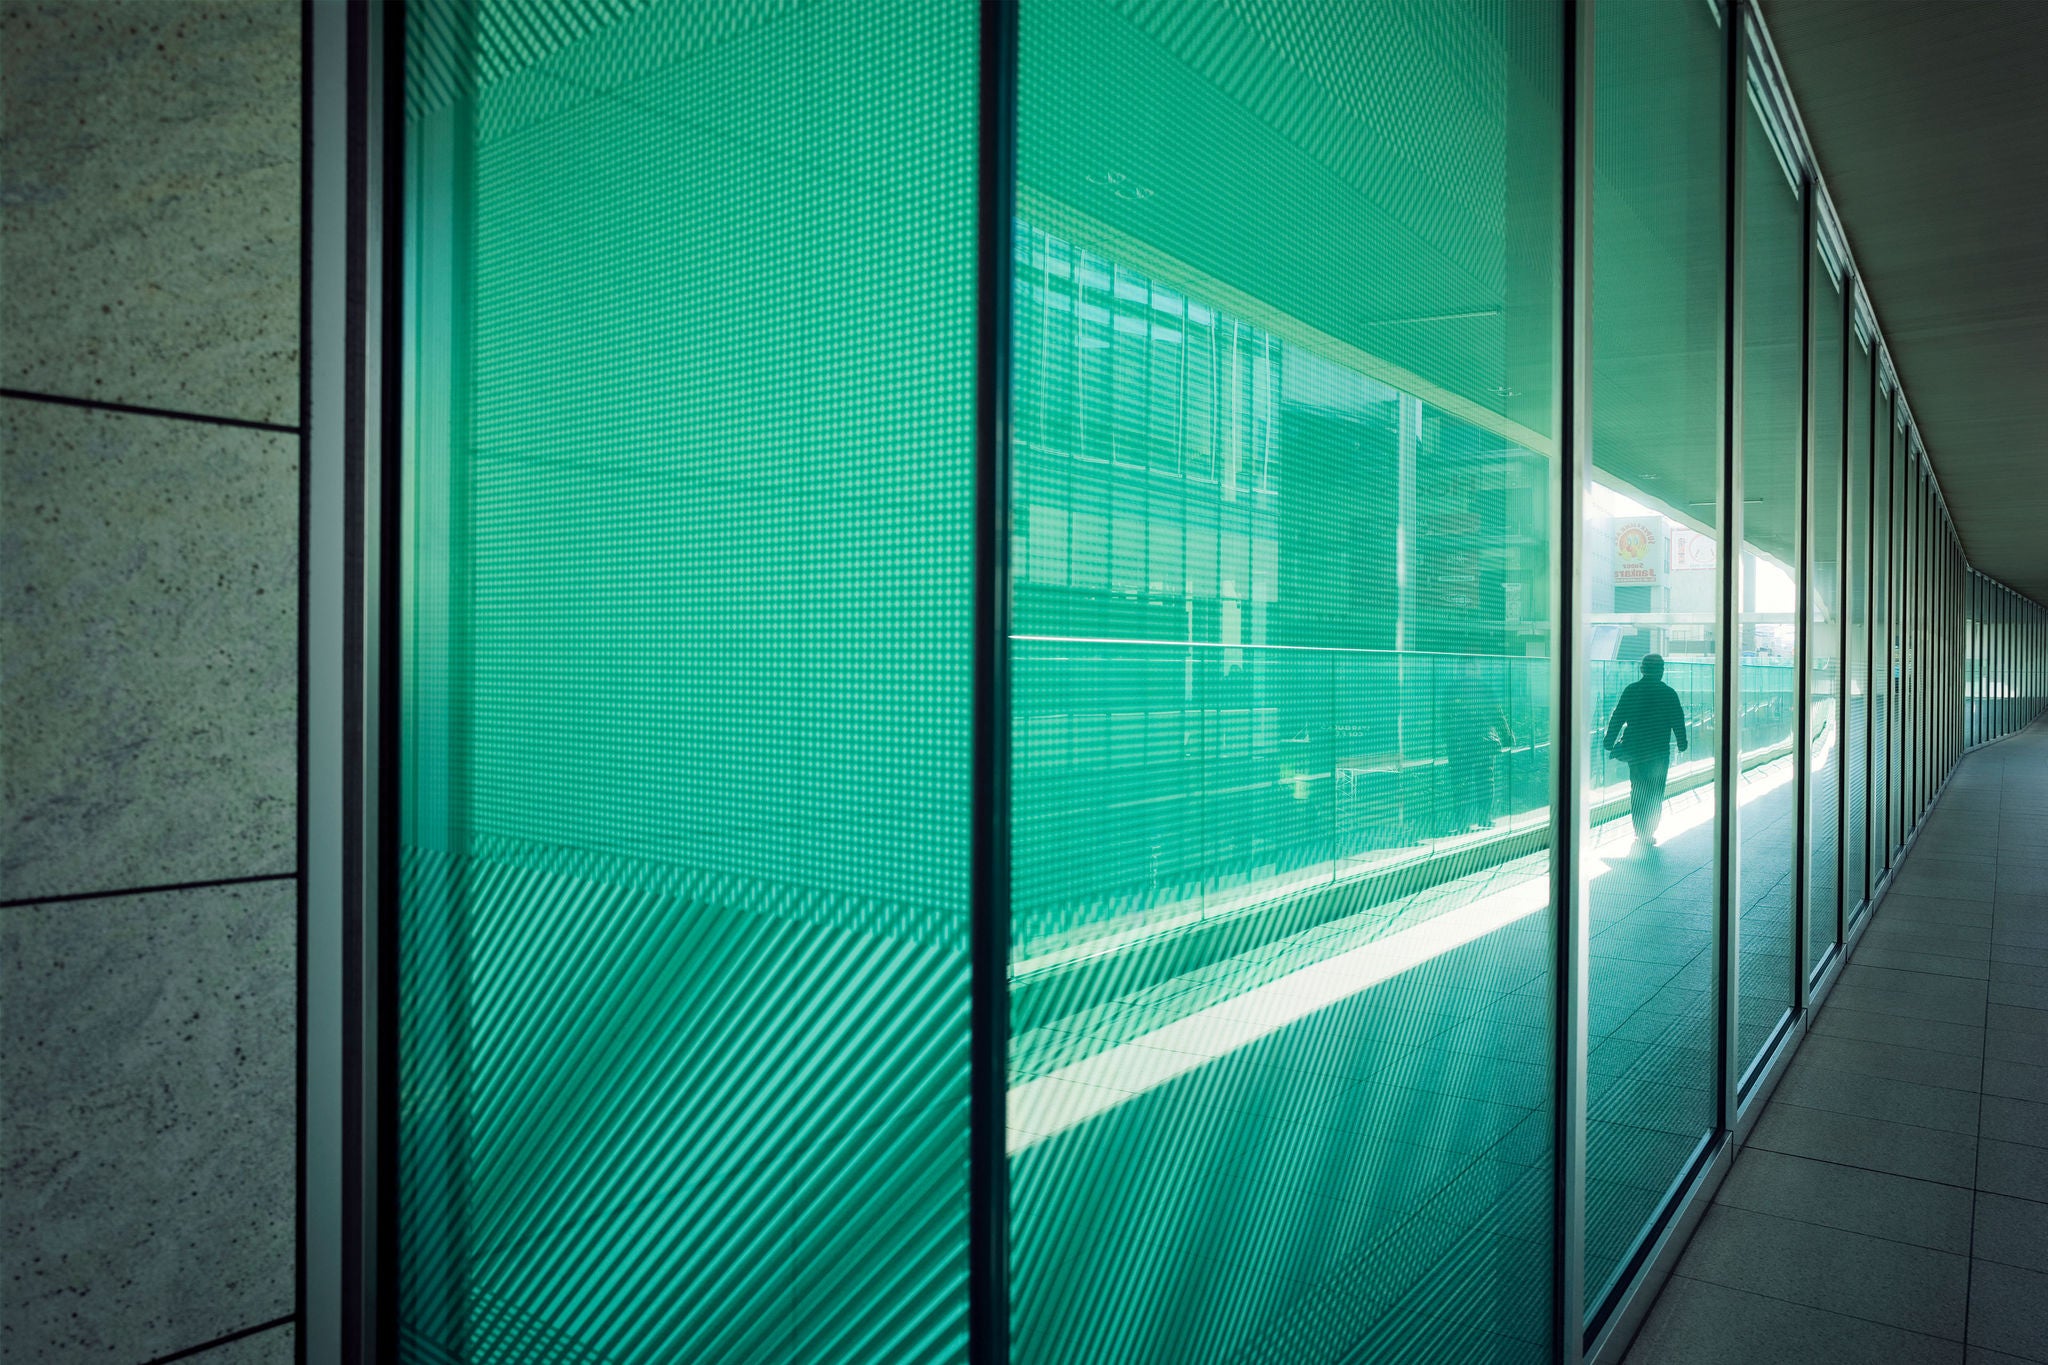 Colourful green glass facade of building reflecting city life